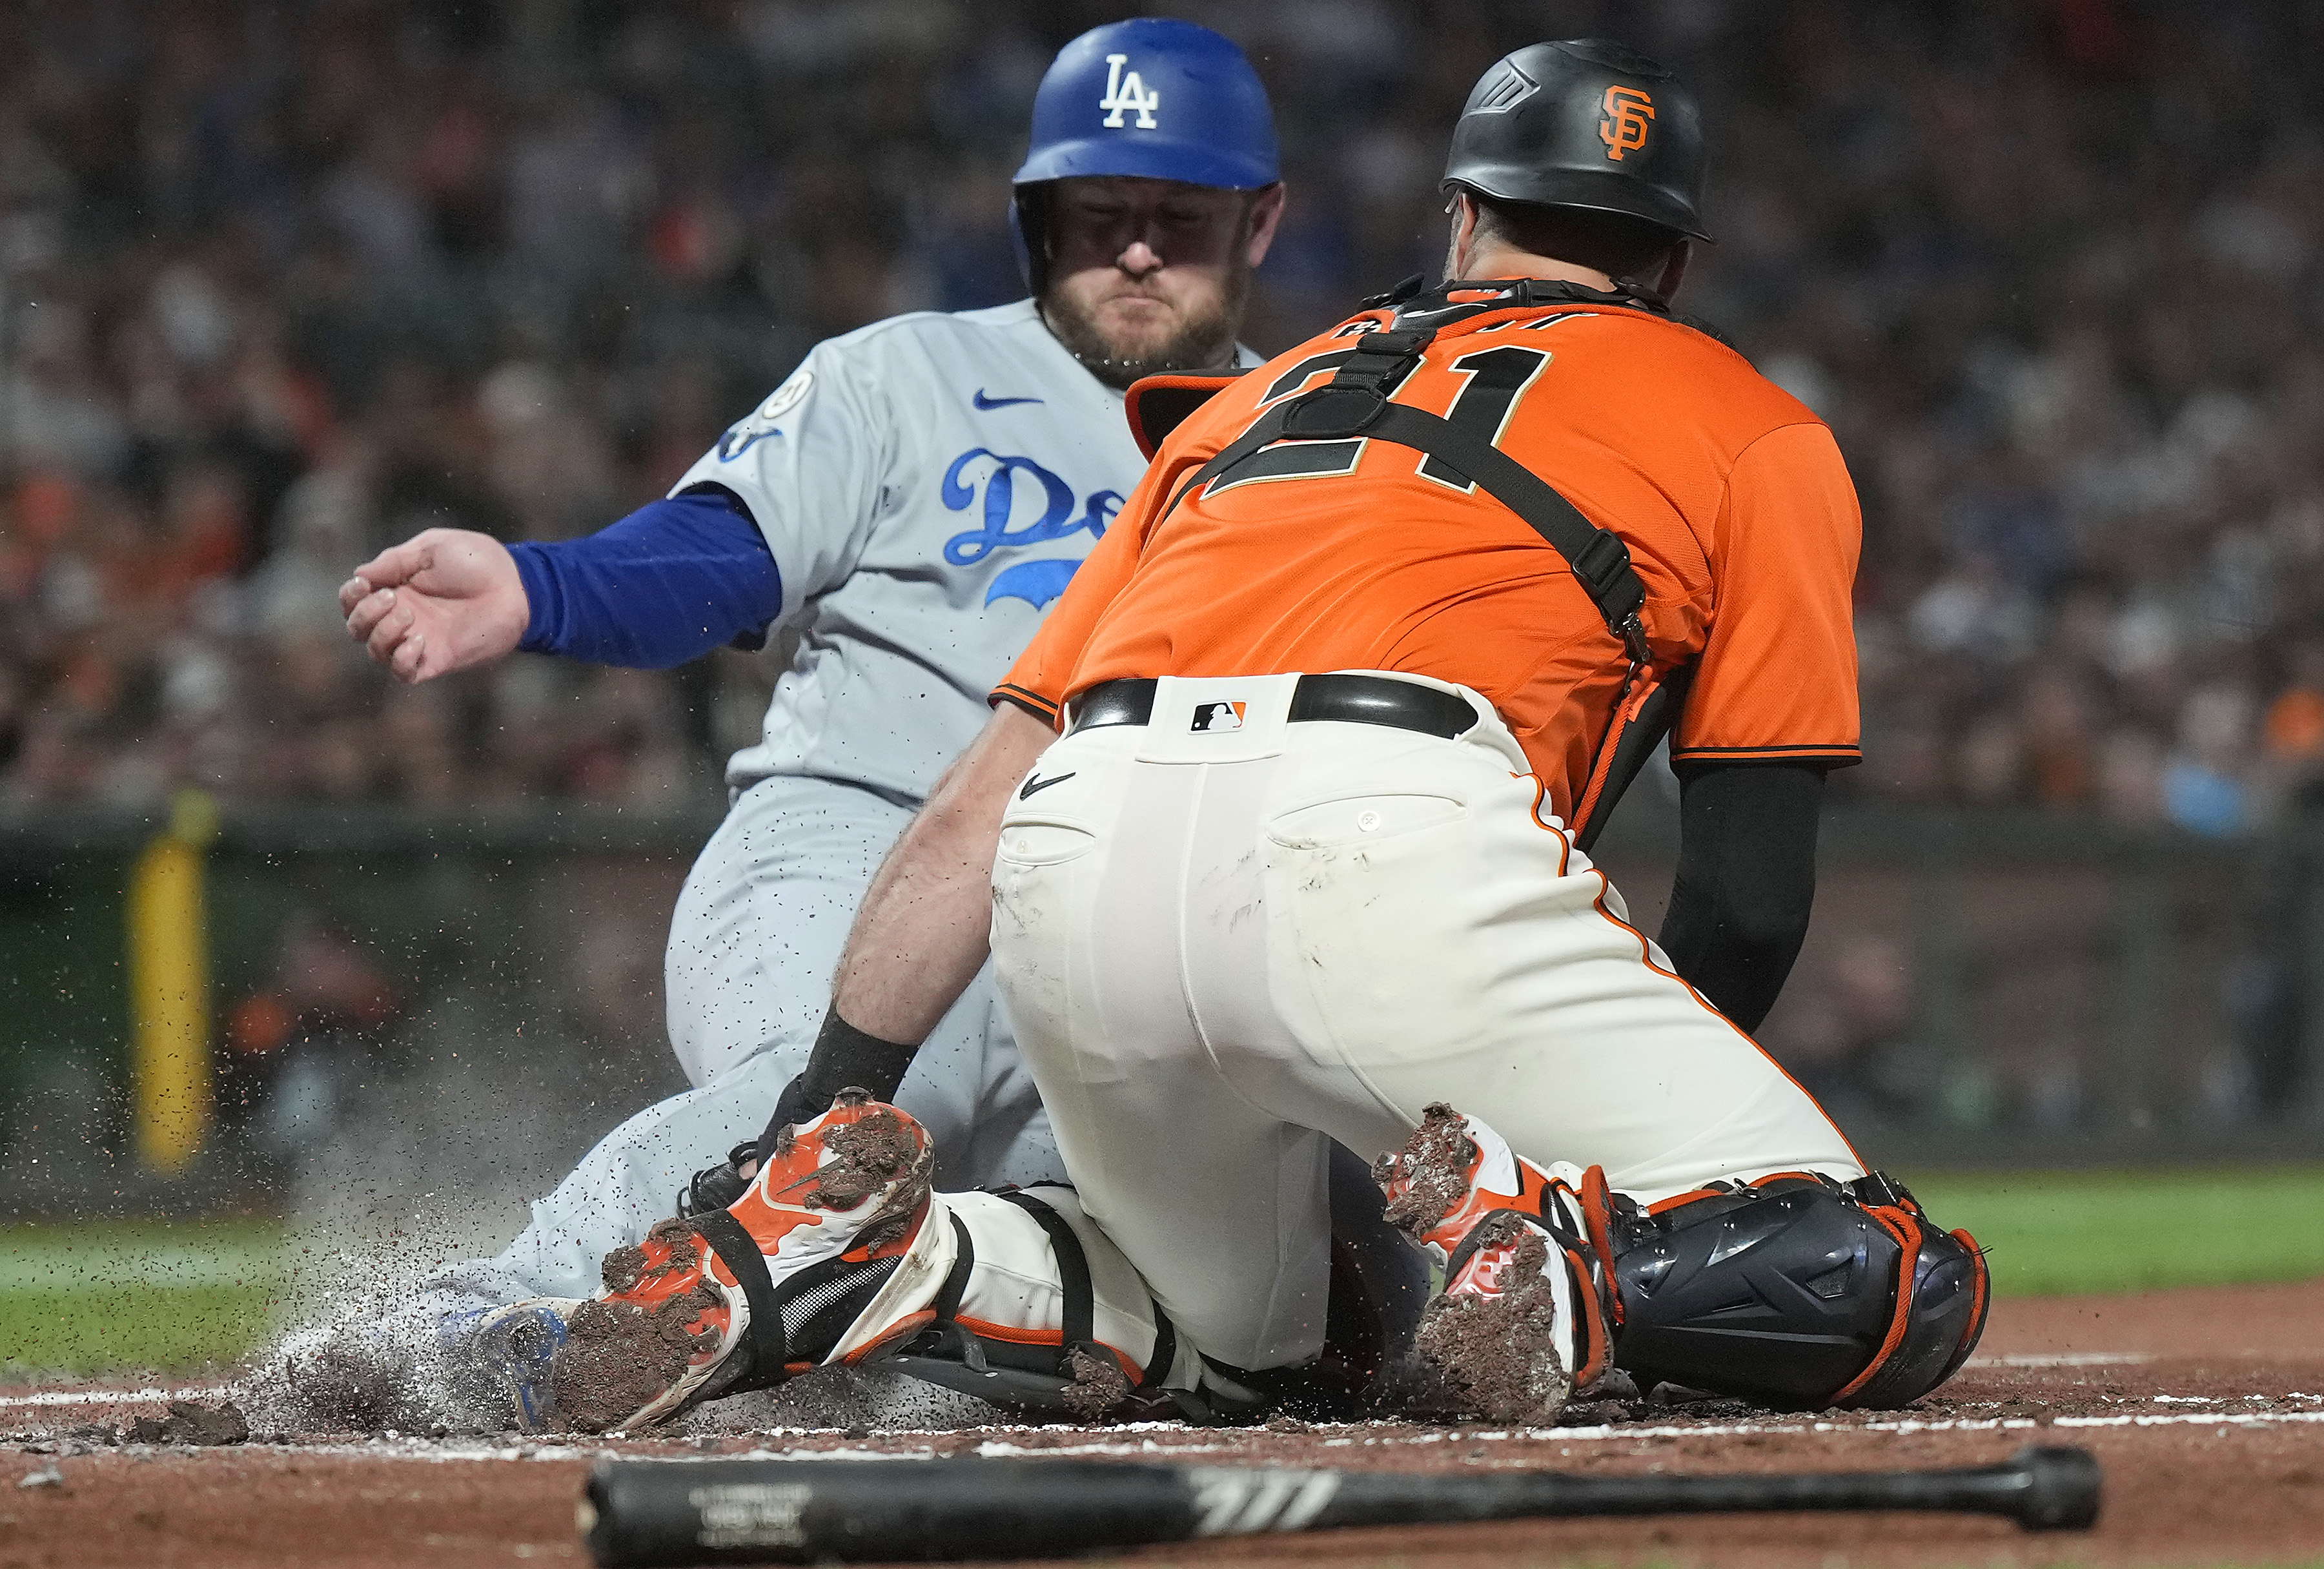 Joey Bart trying to tag Max Muncy at home plate